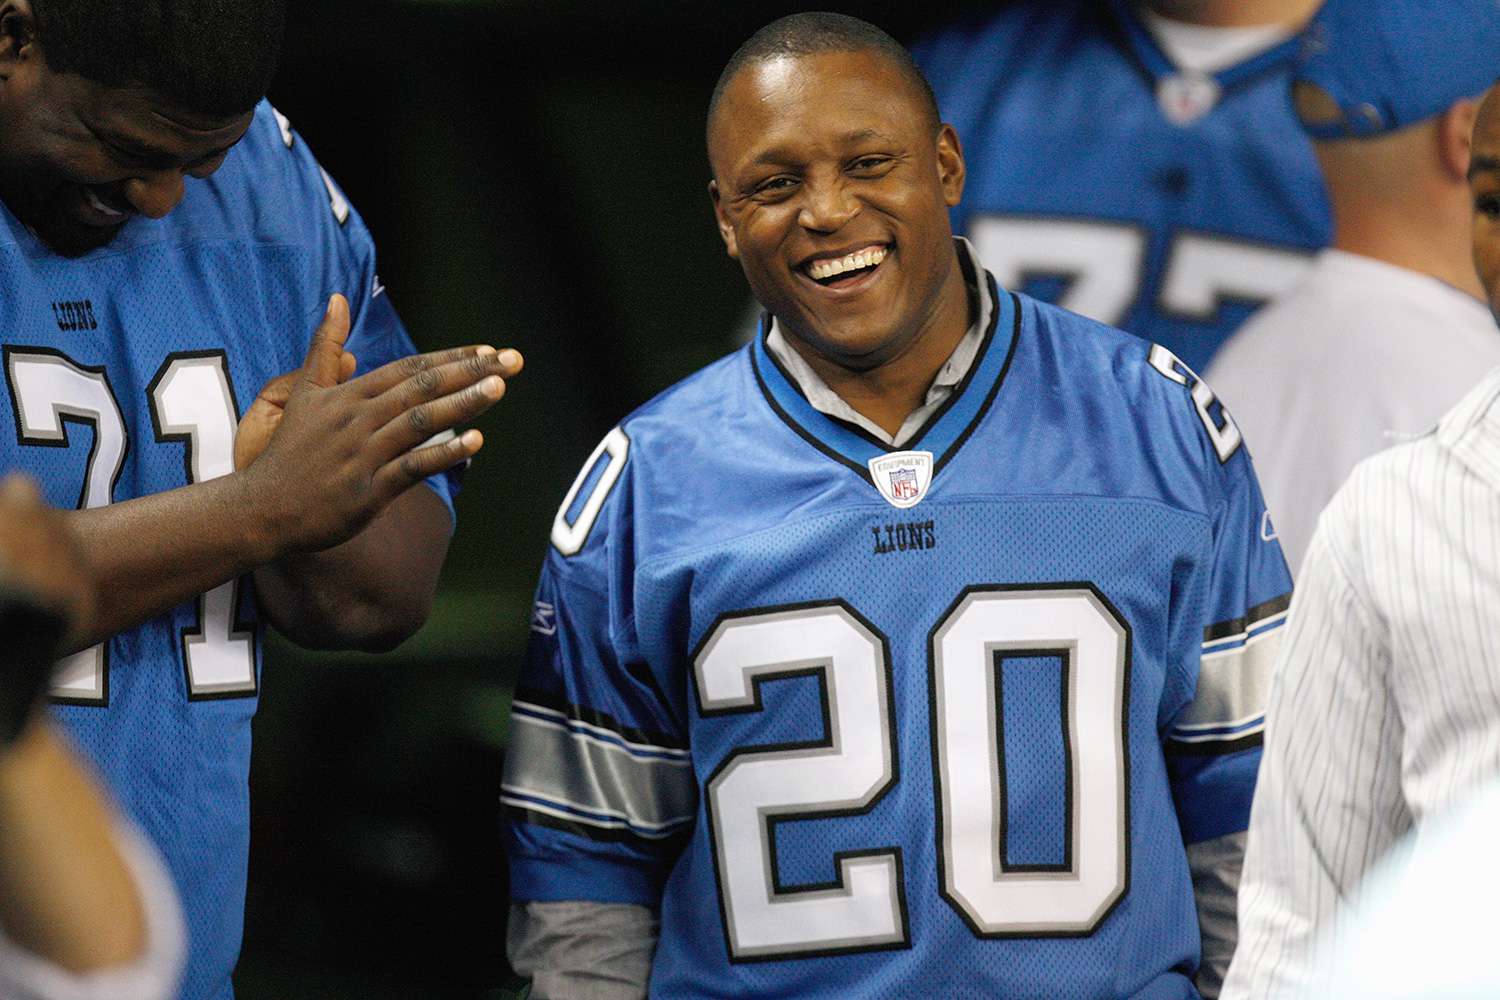 Barry Sanders smiles from the sideline during the game between the Kansas City Chiefs and the Detroit Lions on December 23, 2007 at Ford Field in Detroit, Michigan